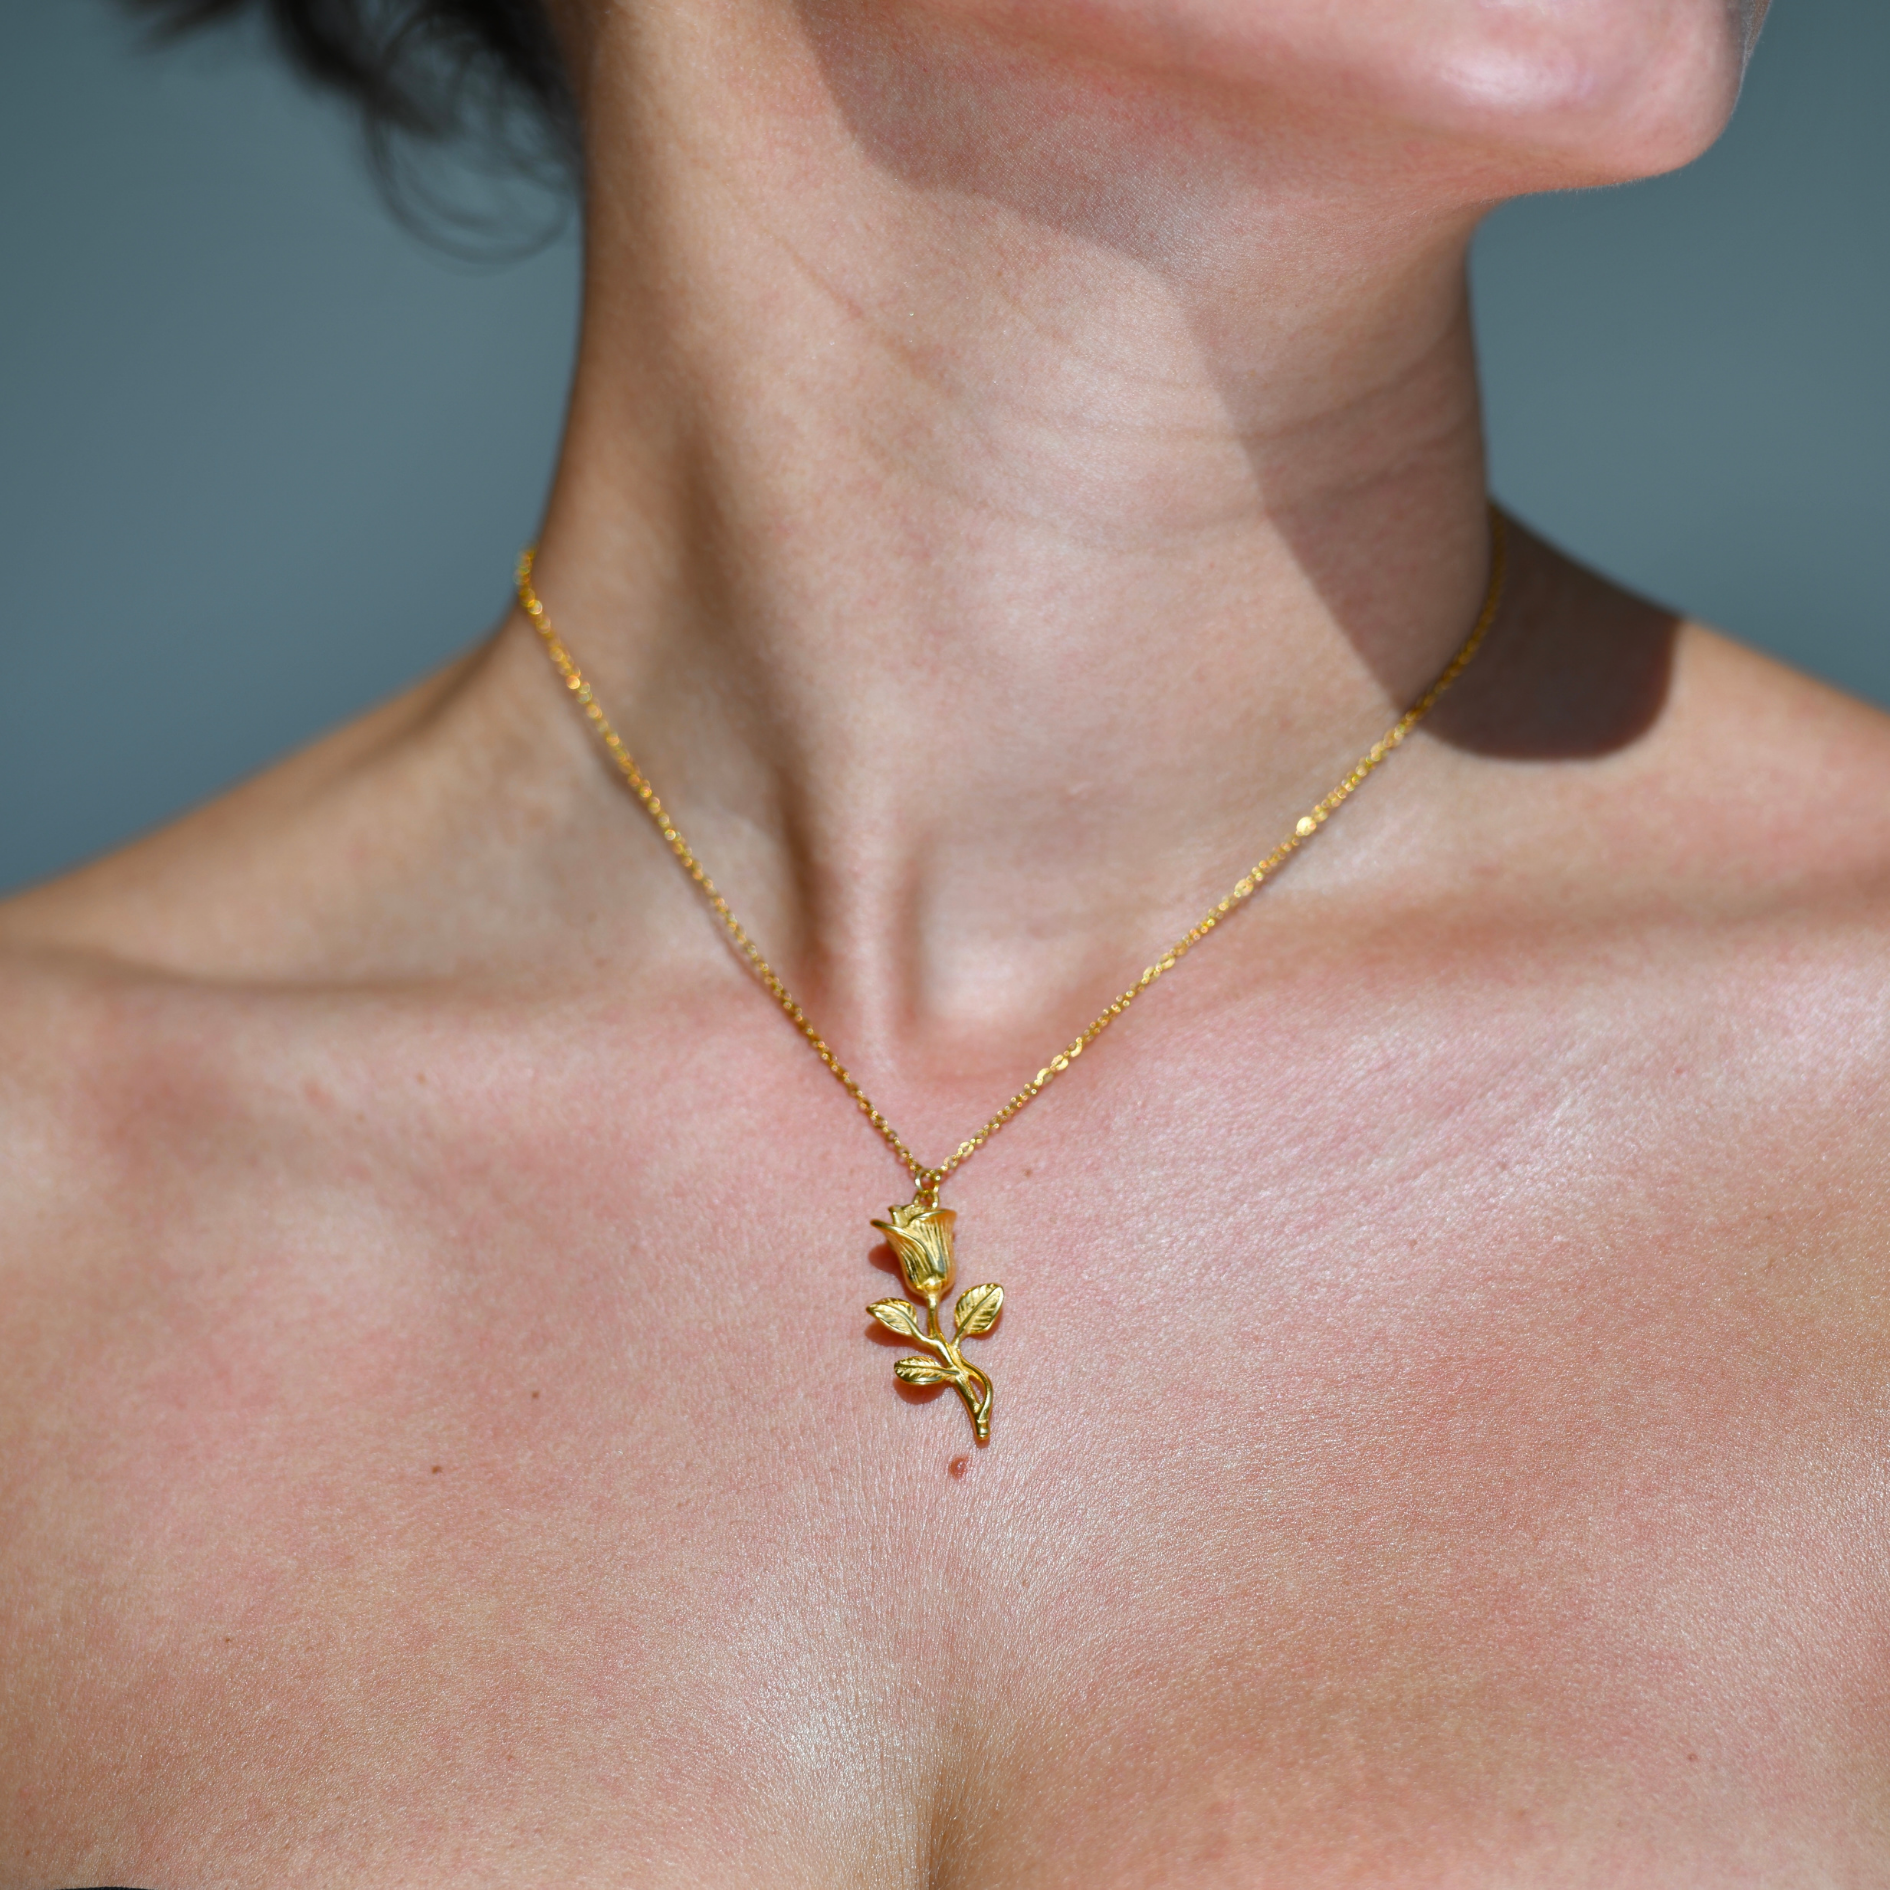 BELLE Rose Pendant Gold Necklace - Gold Necklace with gold chain and a pendant in the shape of a rose which hangs from its flower part with the tail down vertically